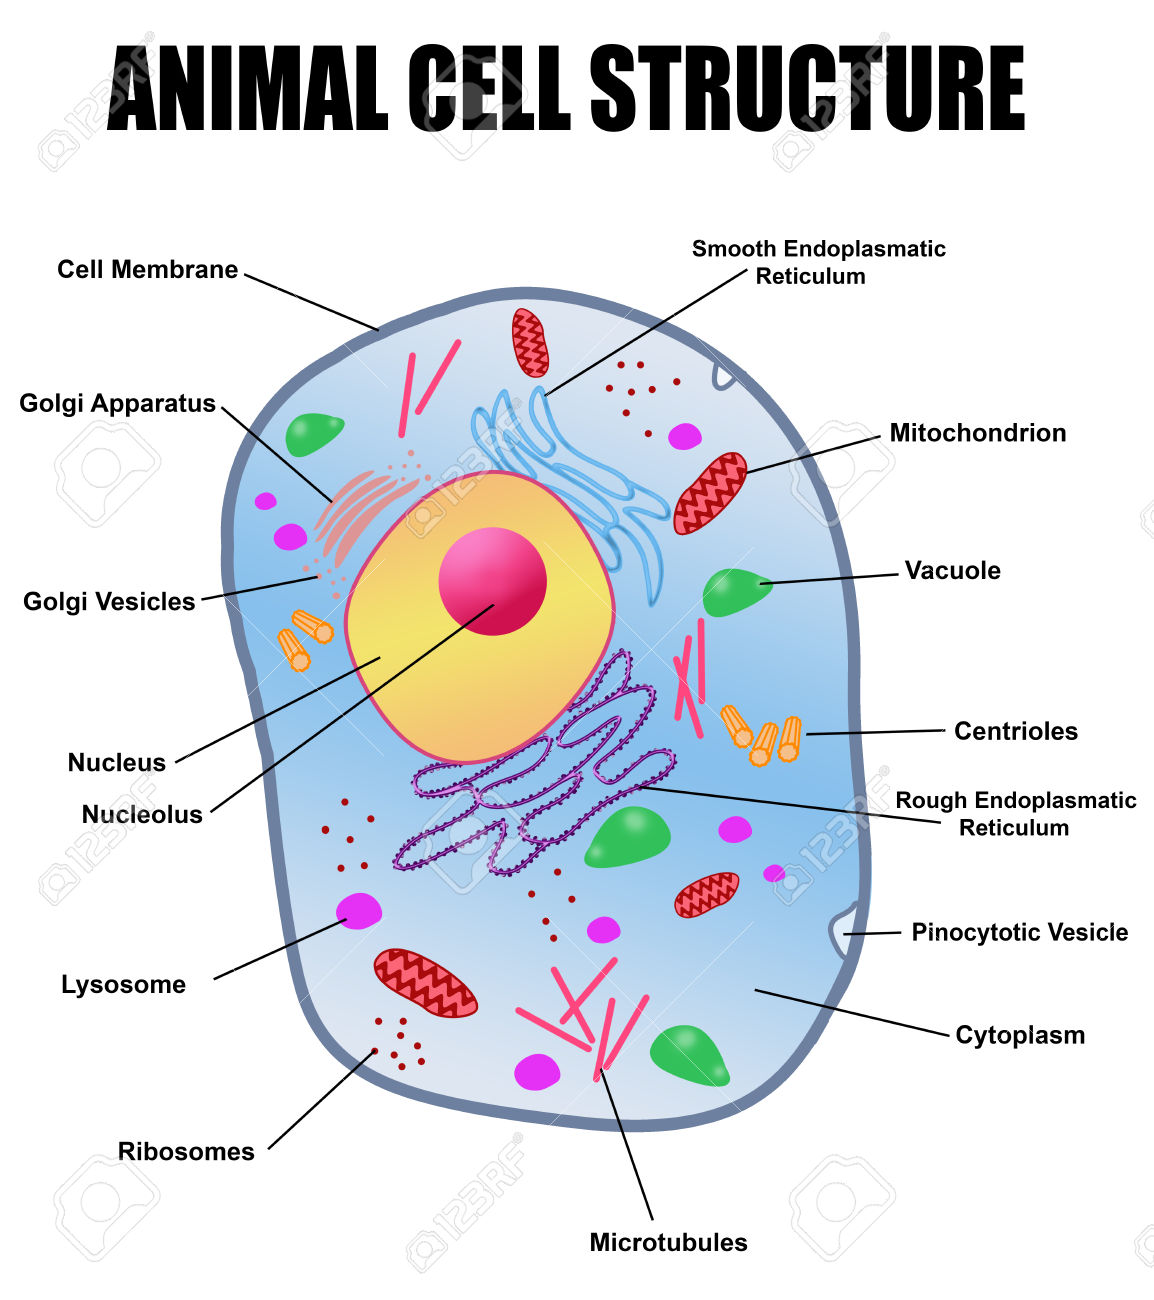 free clipart of an animal cell membrane - Clipground